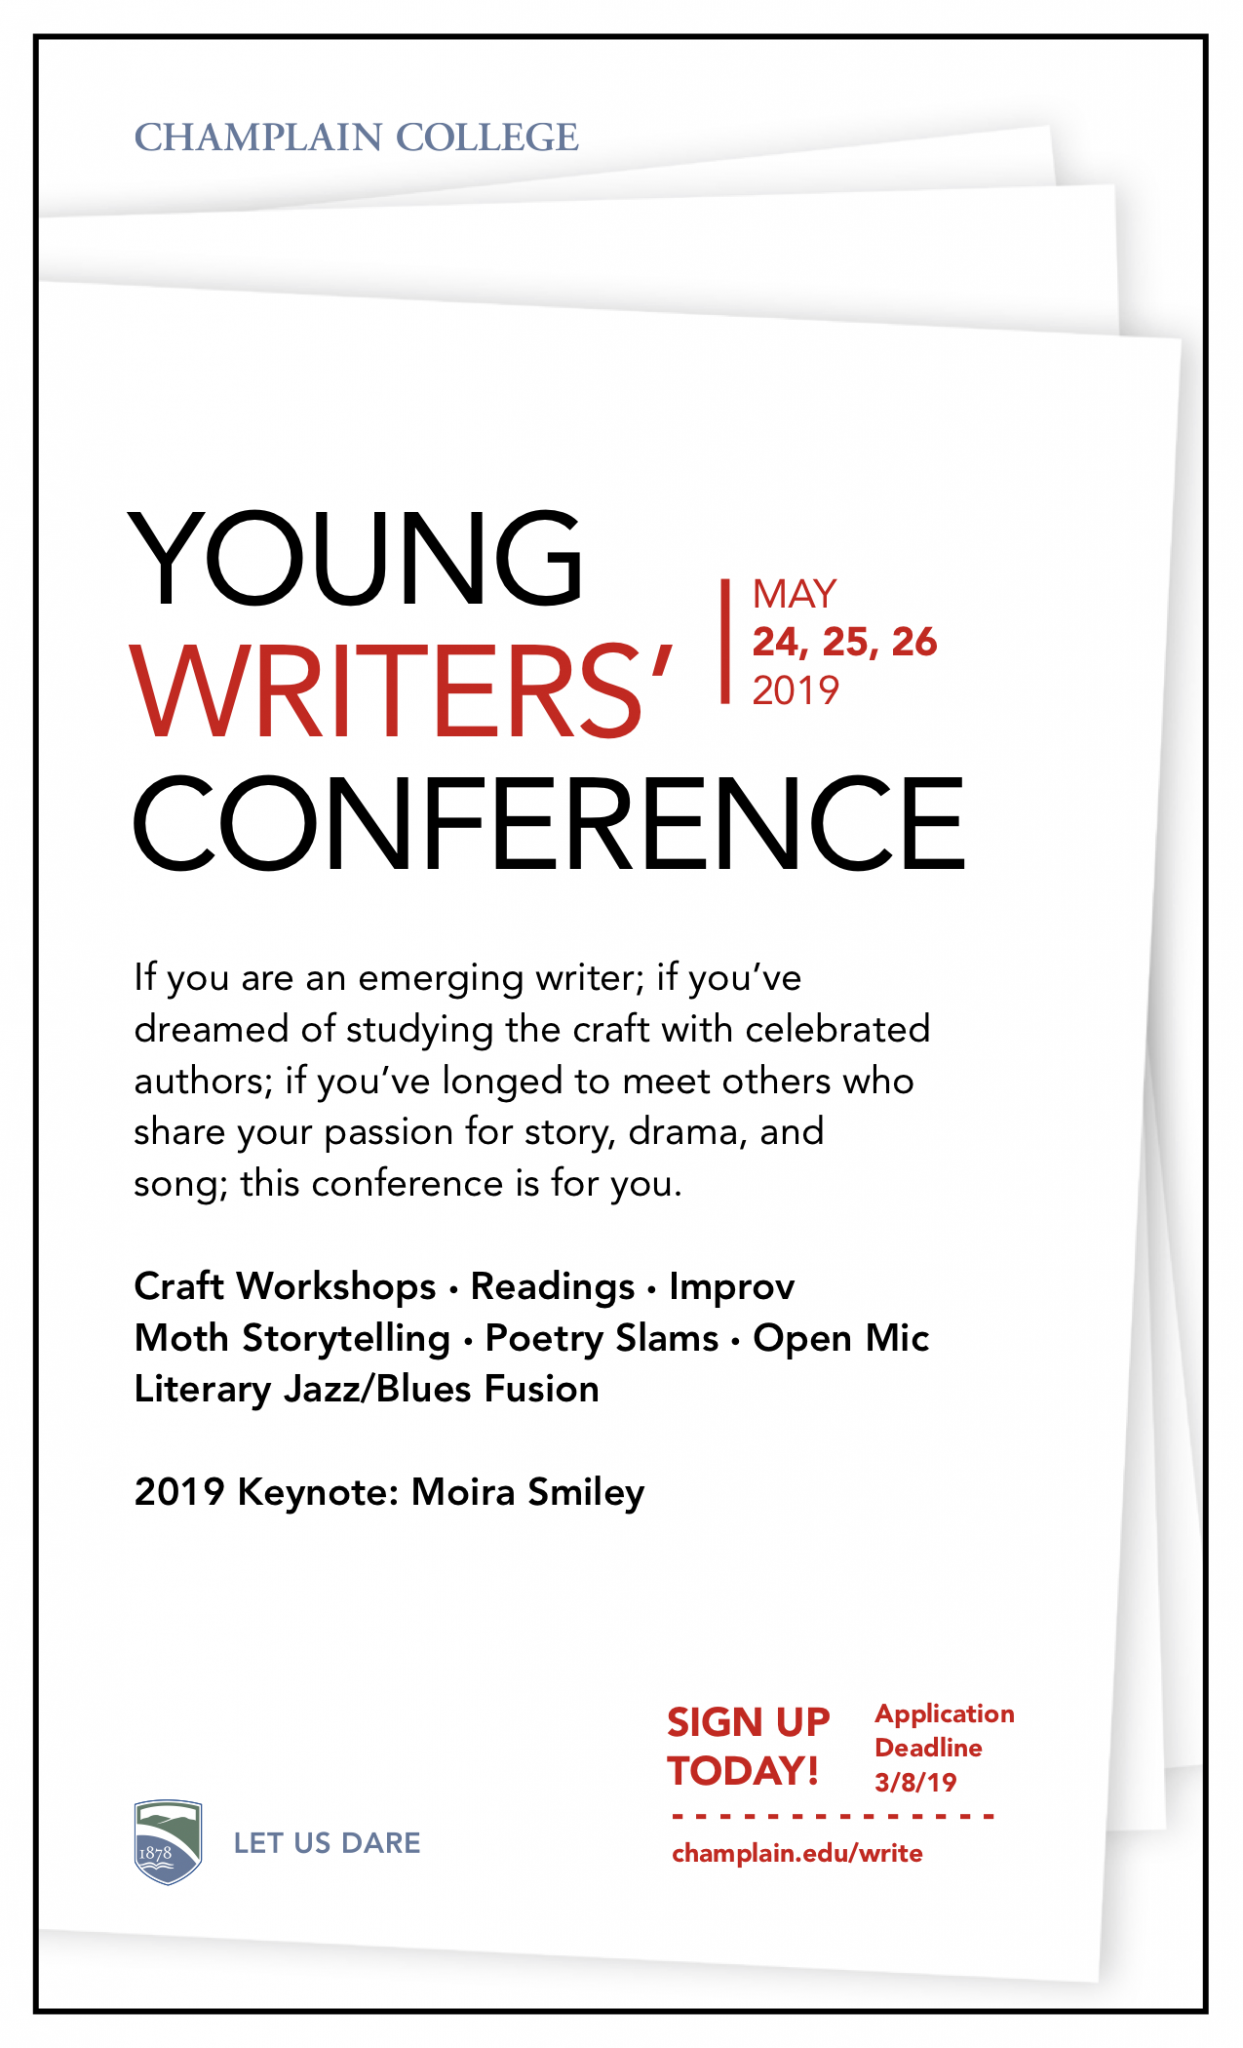 Champlain College Young Writers’ Conference Thetford Academy